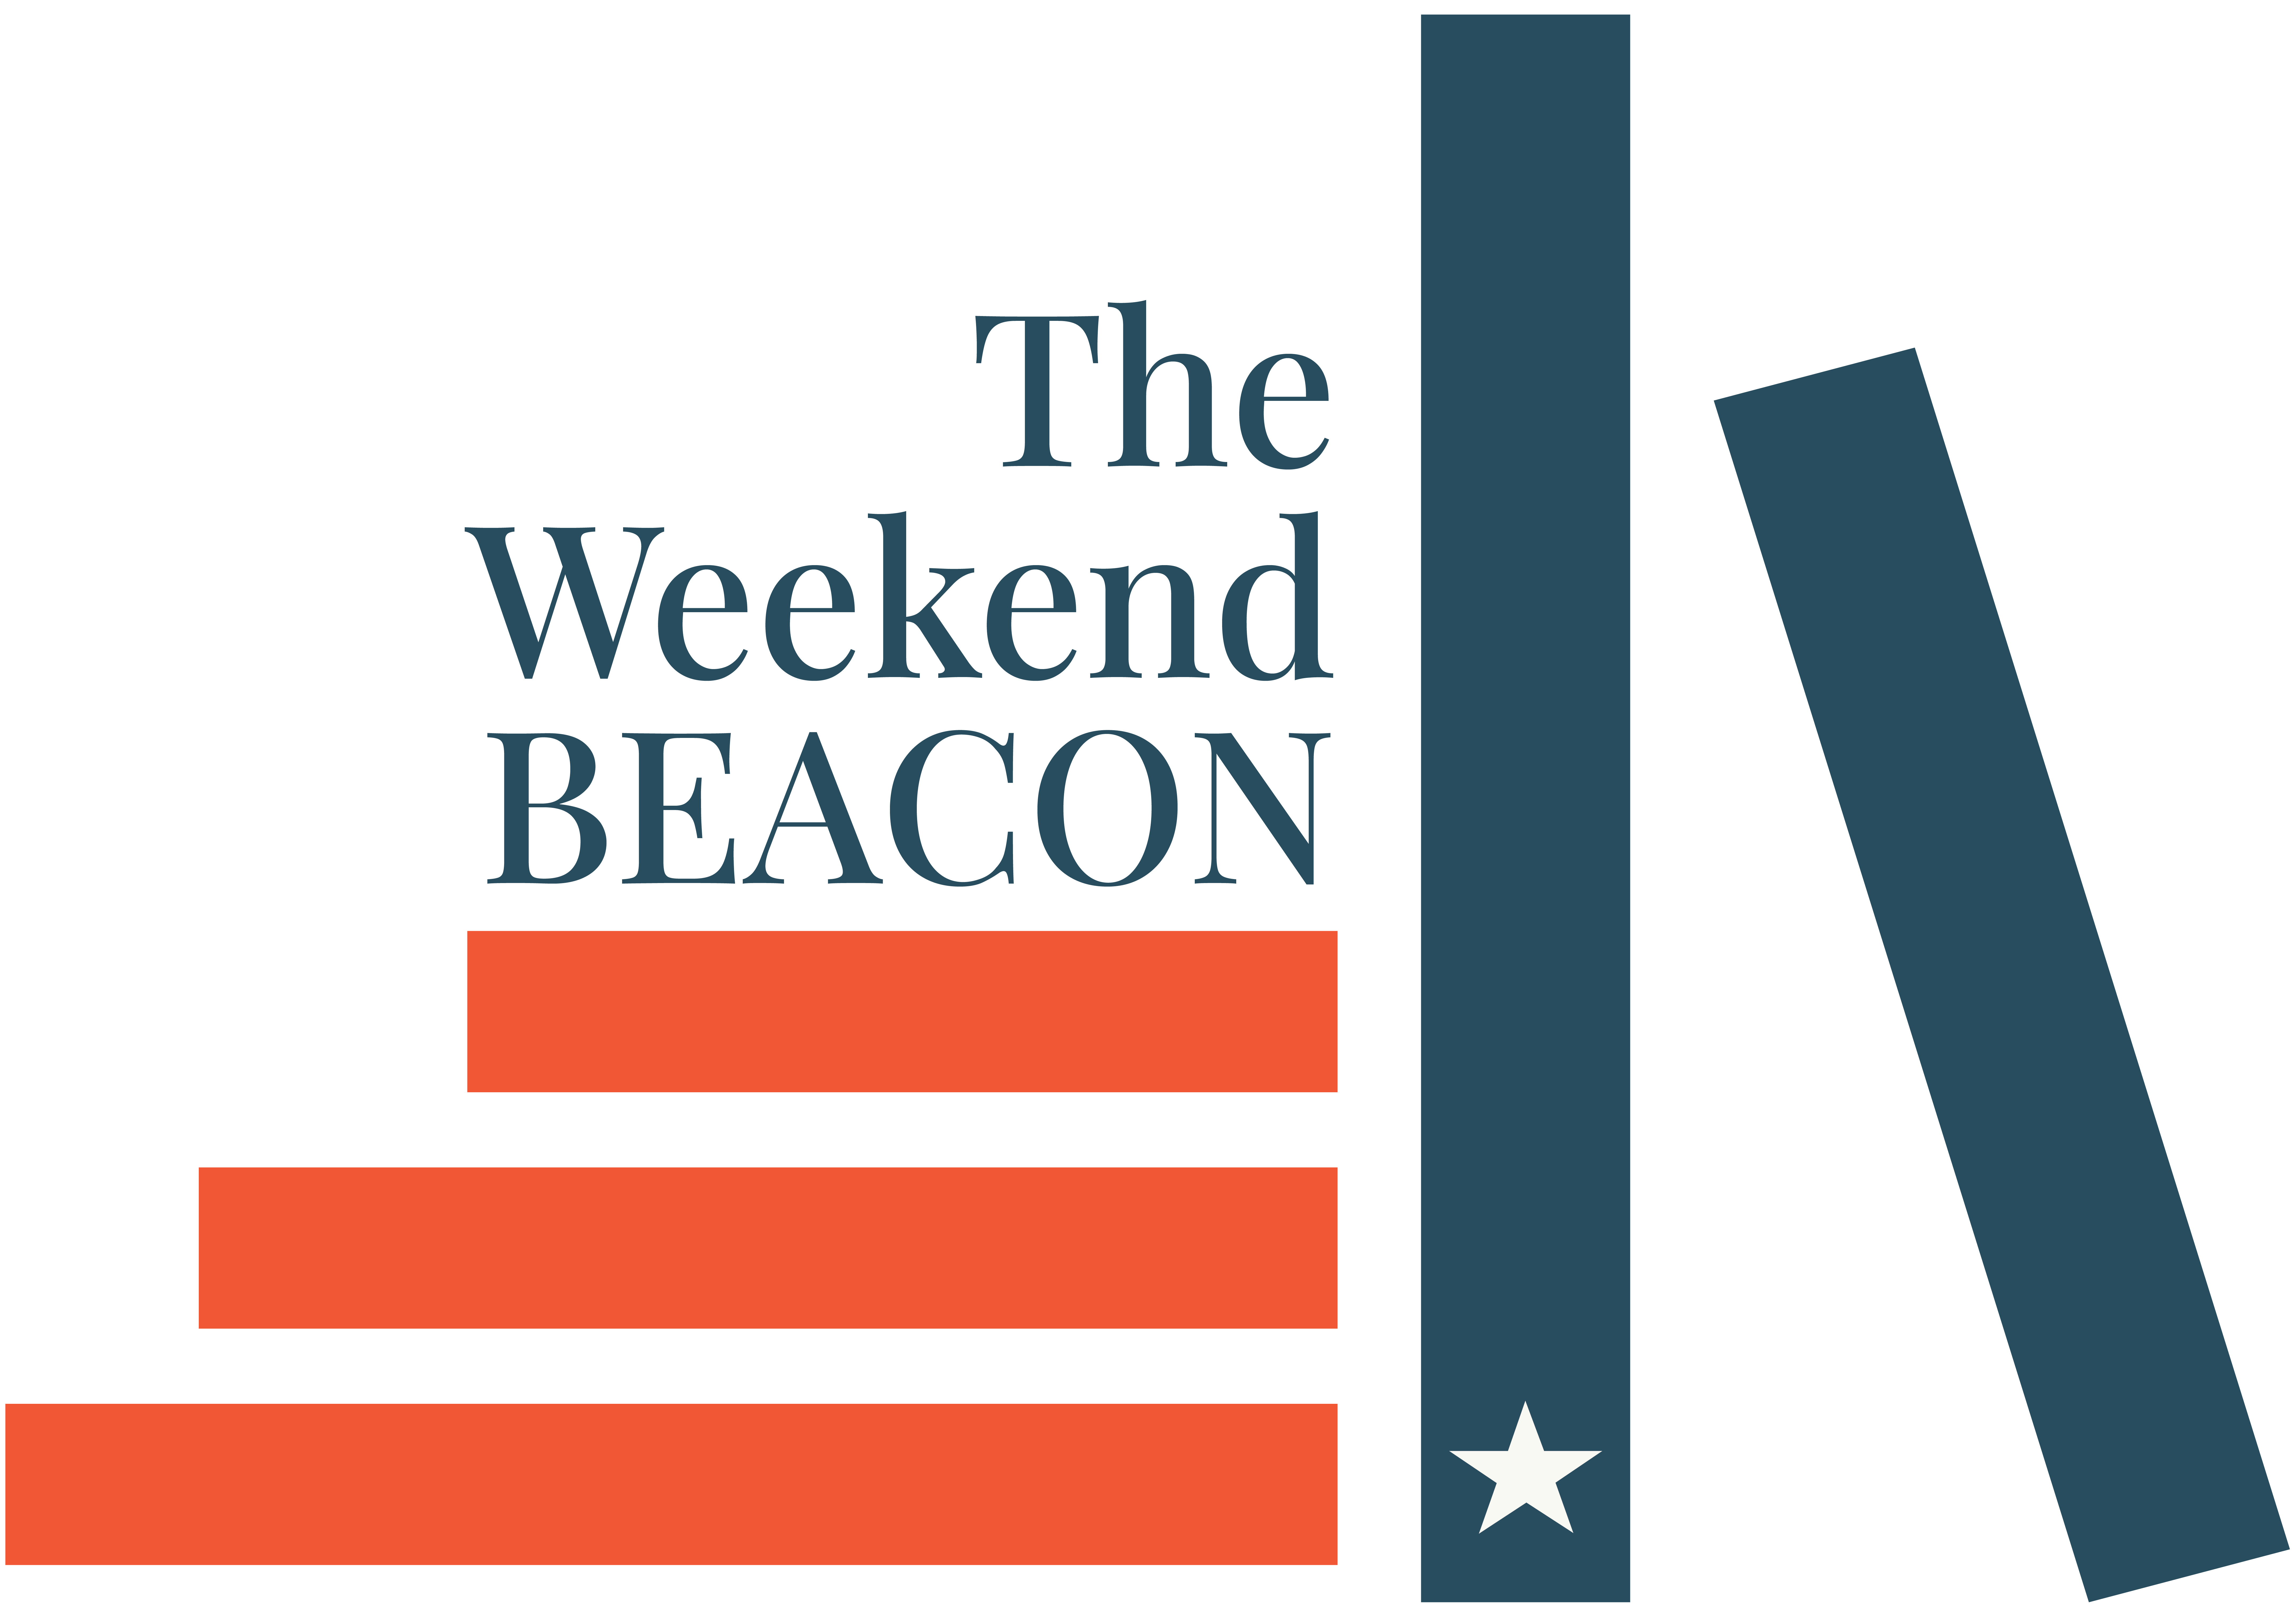 The Weekend Beacon